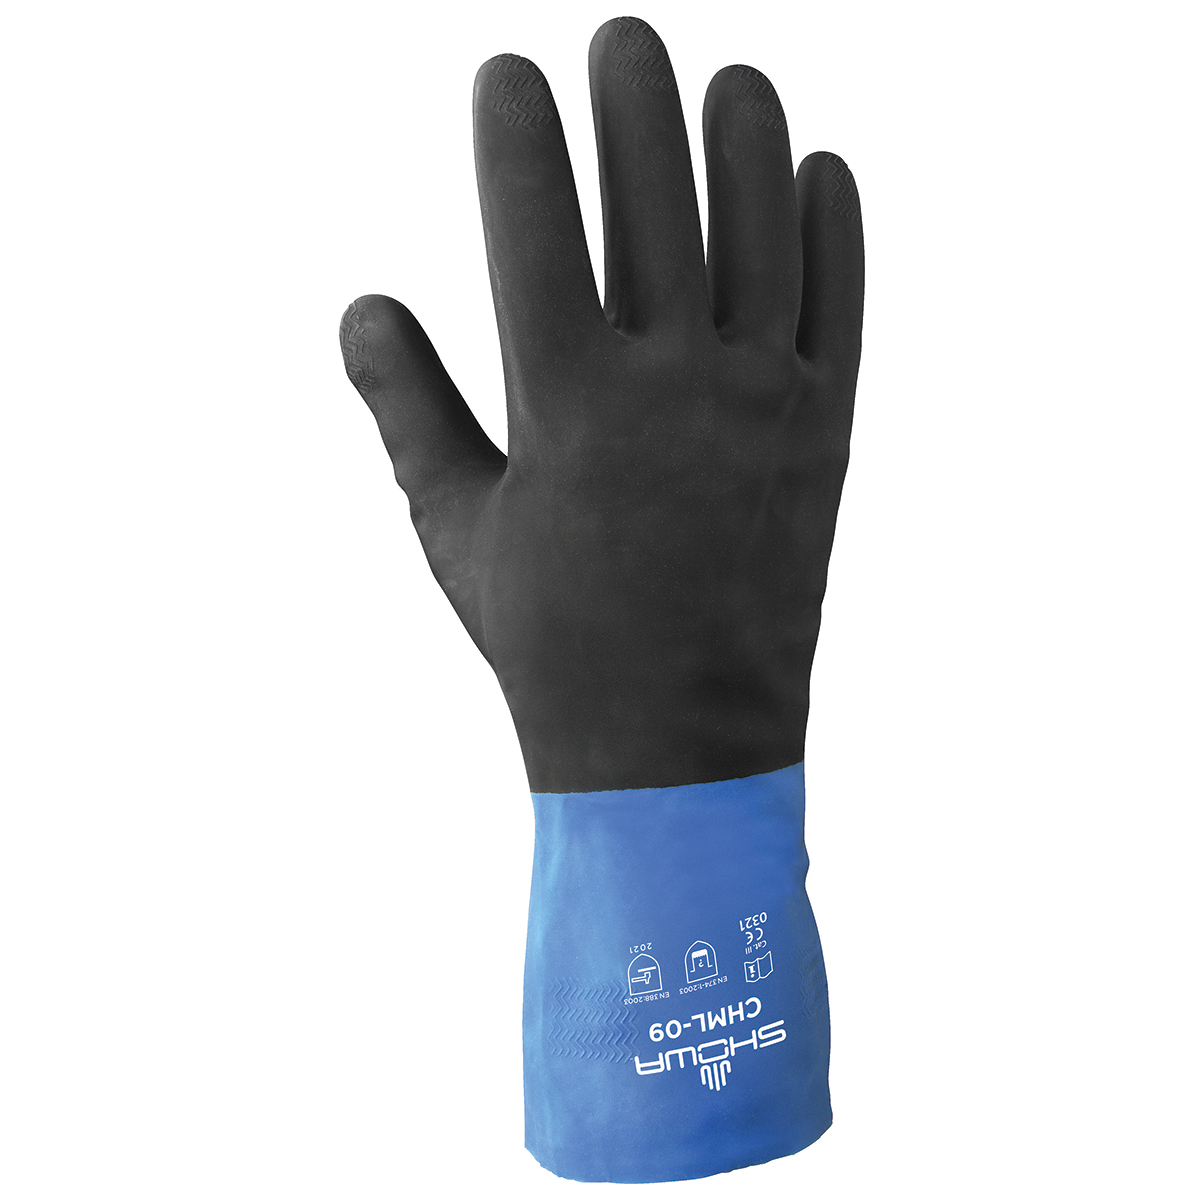 Chemical resistant, neoprene-over-natural rubber latex, unsupported, 12", 26-mil, flock lined, black over blue safety feature, small